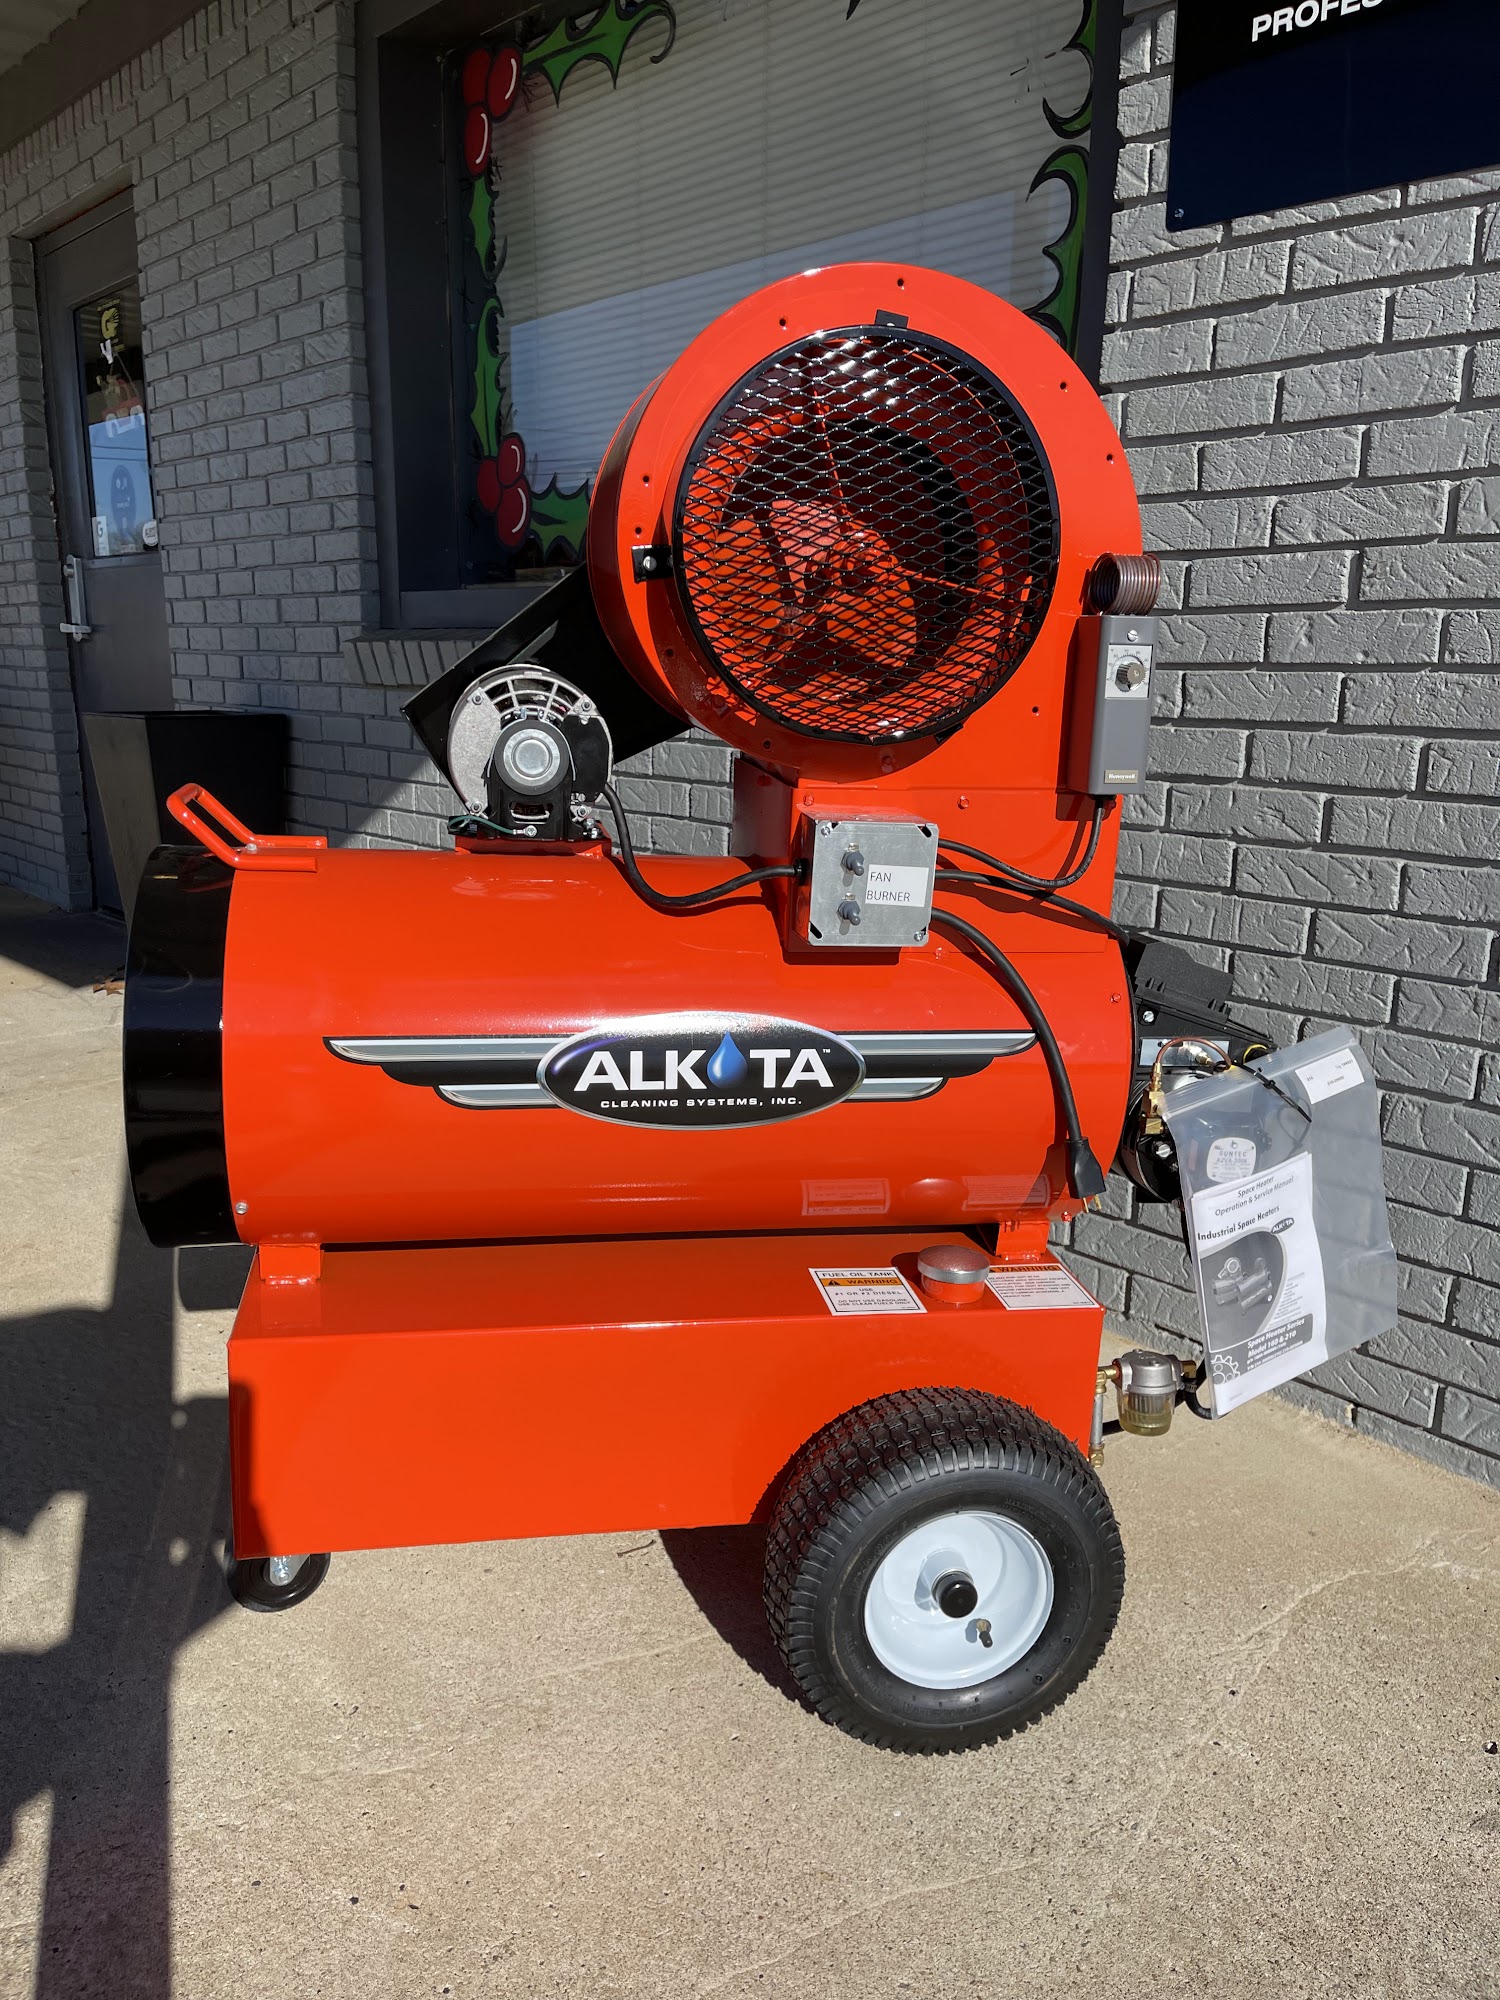 KS Supply Pressure Washer Sales and Service Inc. 1008 Old Clarksville Pike, Pleasant View Tennessee 37146